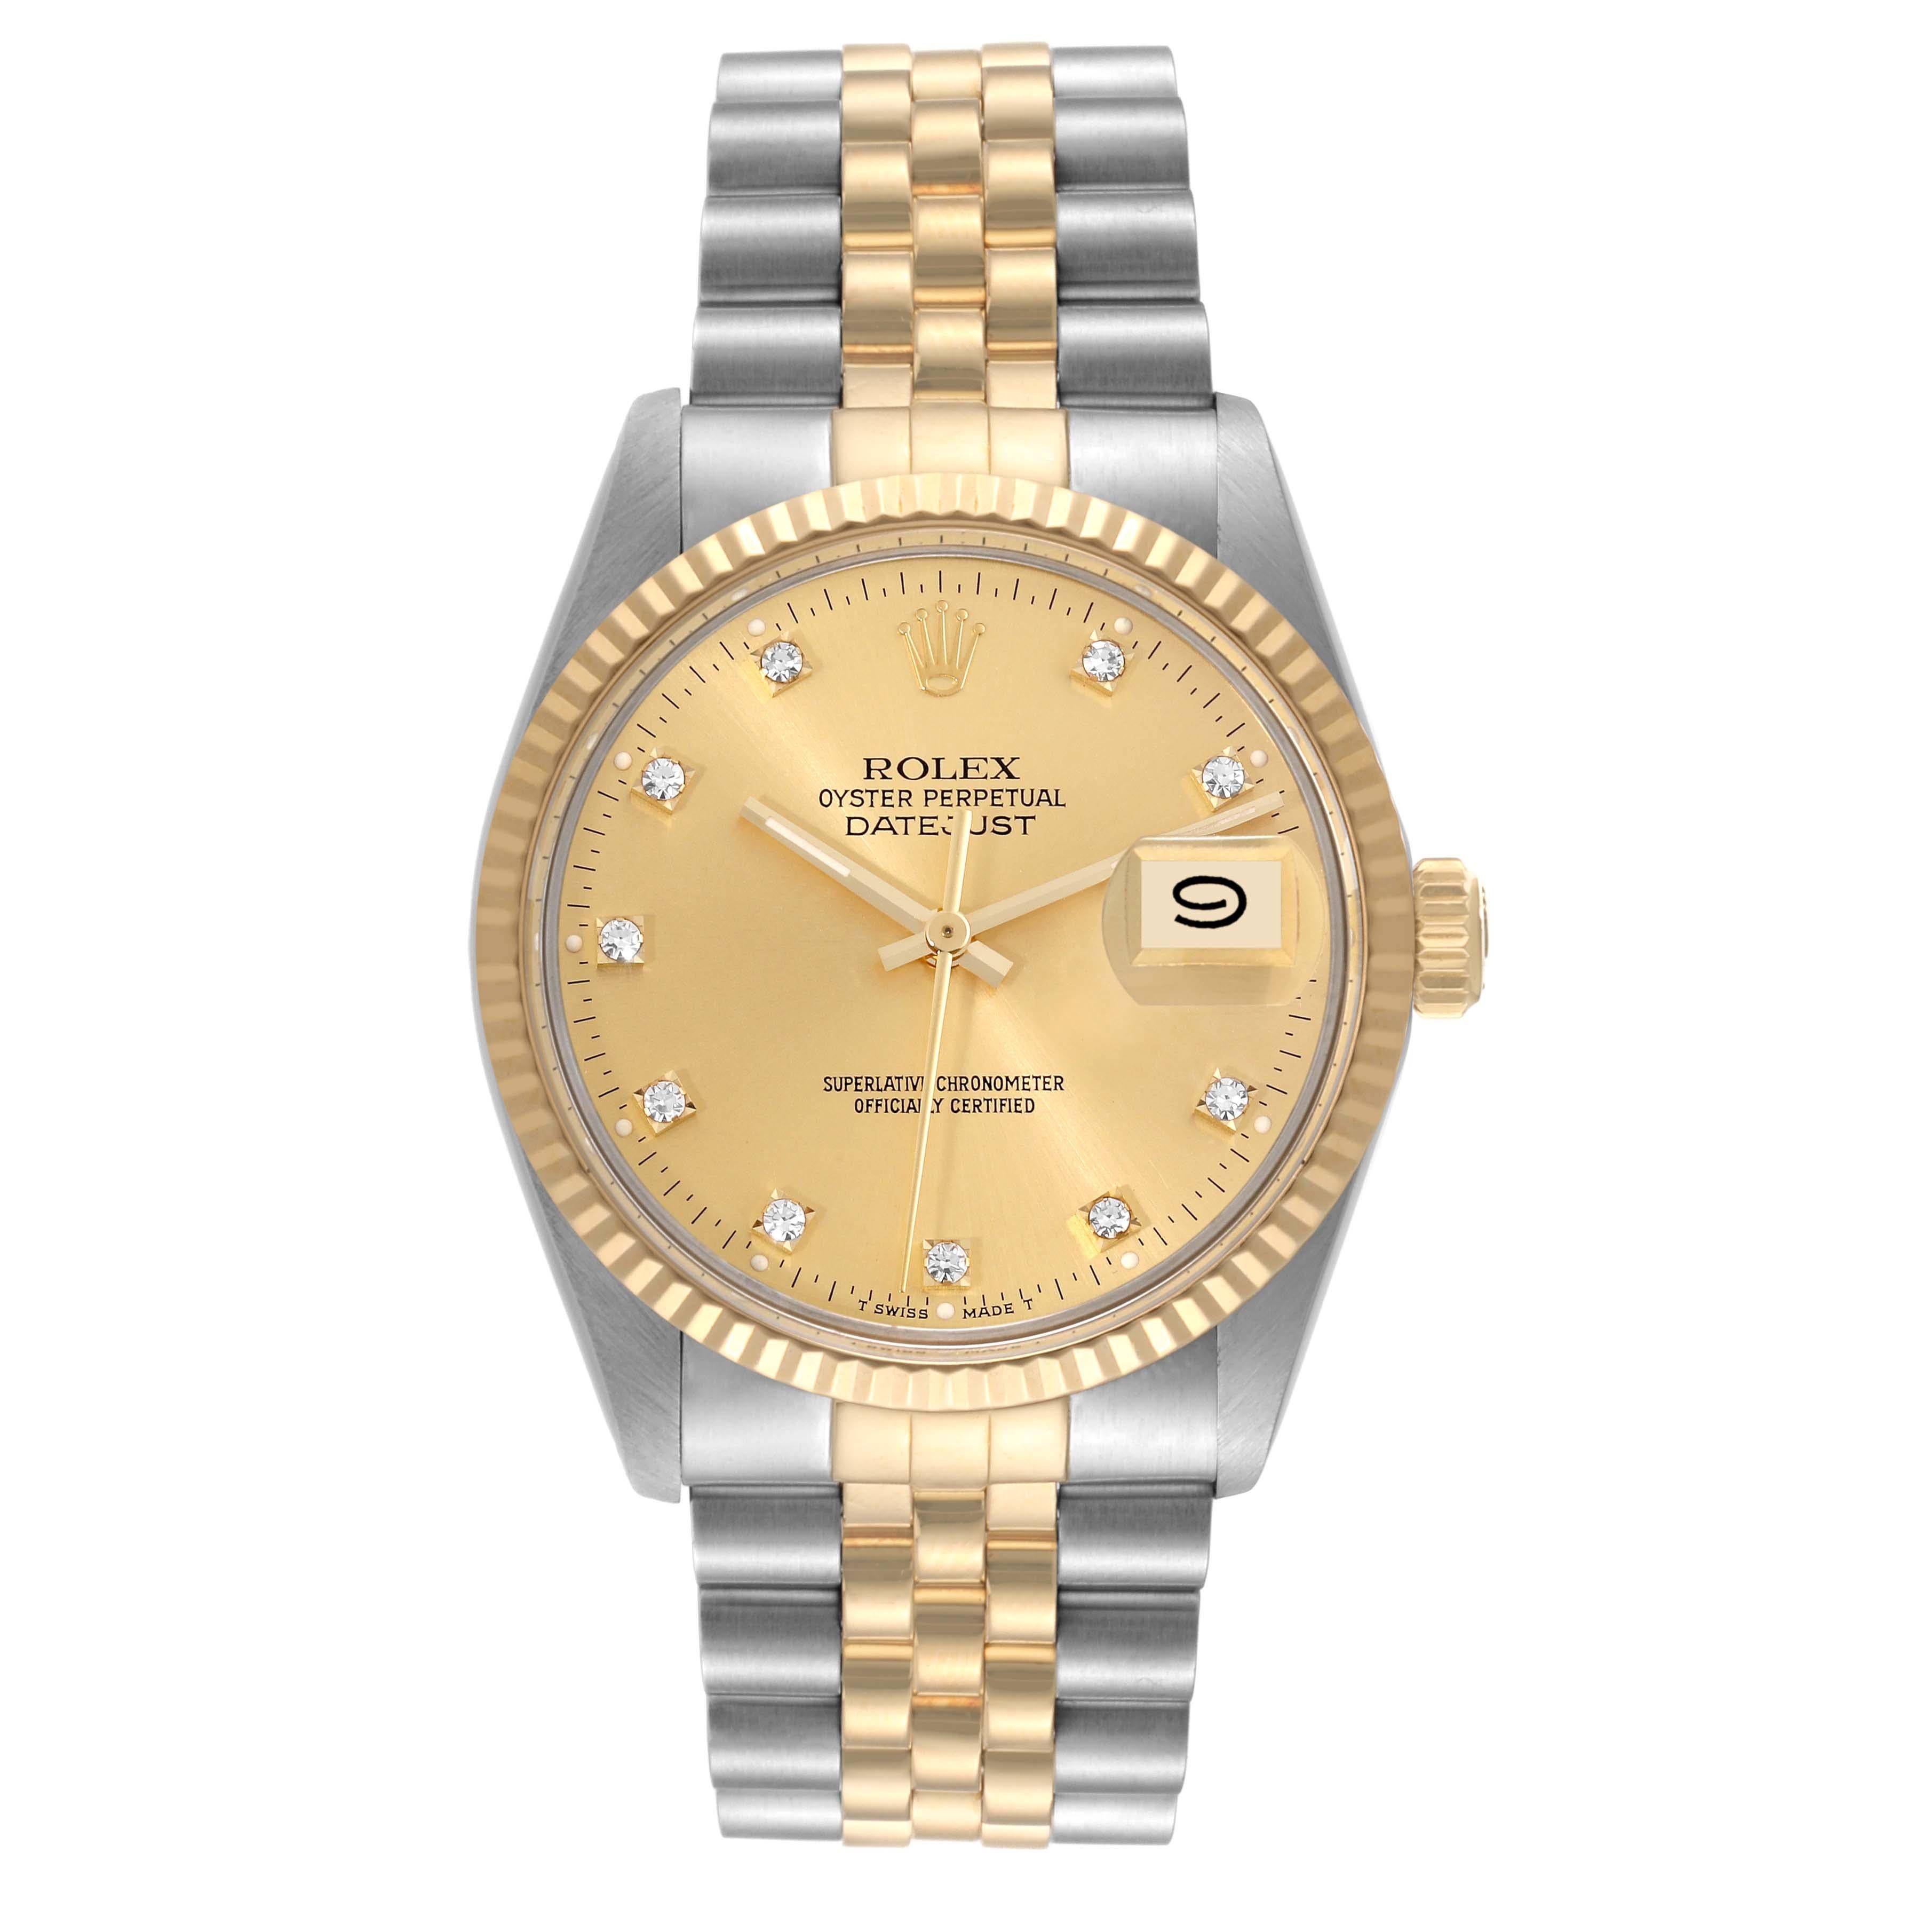 Rolex Datejust Steel Yellow Gold Diamond Vintage Mens Watch 16013 Box Papers. Officially certified chronometer automatic self-winding movement. Stainless steel oyster case 36.0 mm in diameter. Rolex logo on the crown. 18k yellow gold fluted bezel.